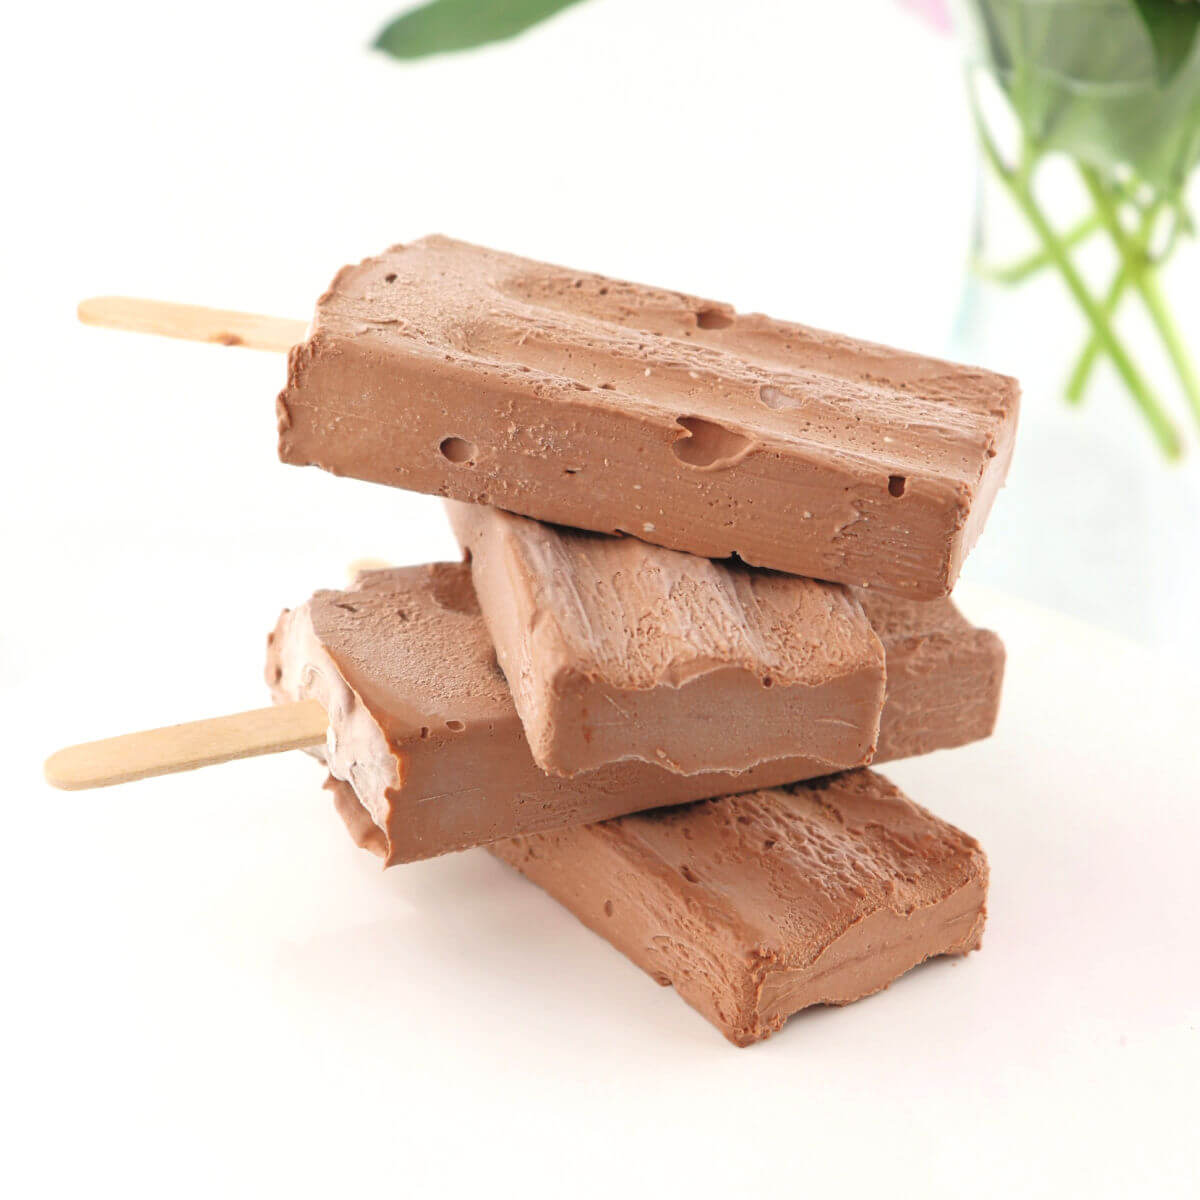 Keto Chocolate Ice Cream Bars are the perfect summer fun in the sun low carb treat.